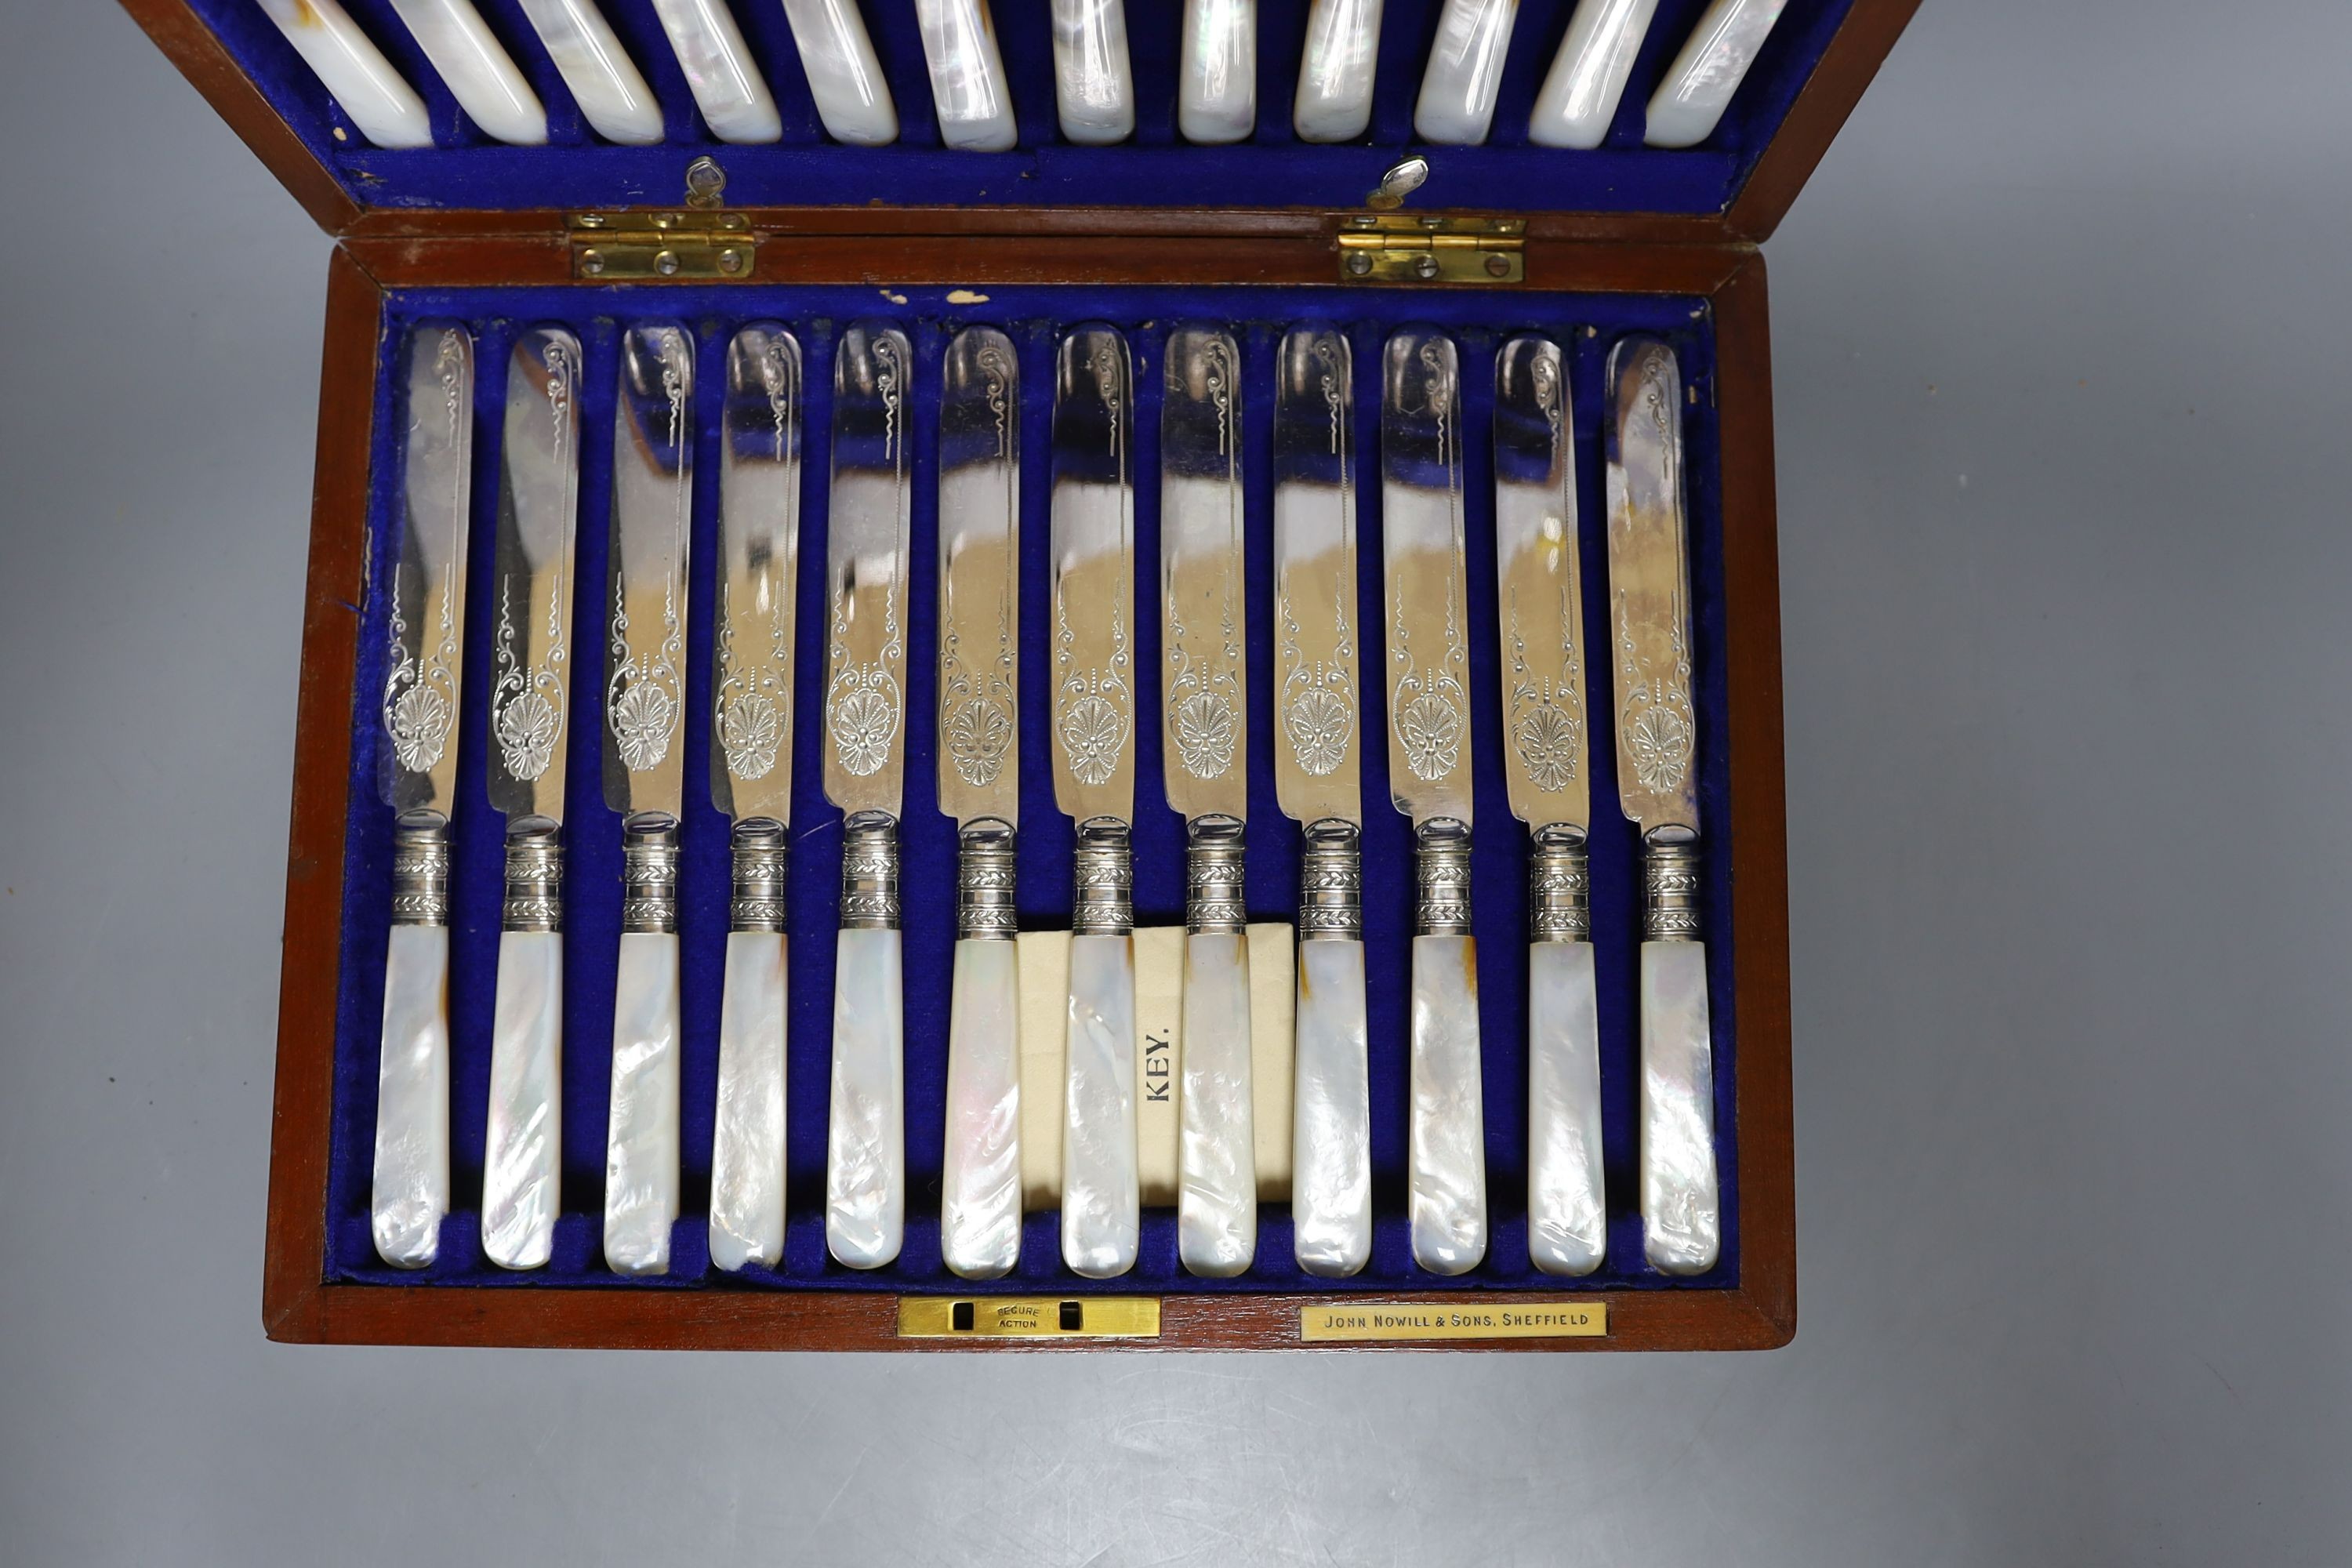 A cased set of silver handled pistol knives and a cased set of mother-of-pearl knives and forks - Image 4 of 4